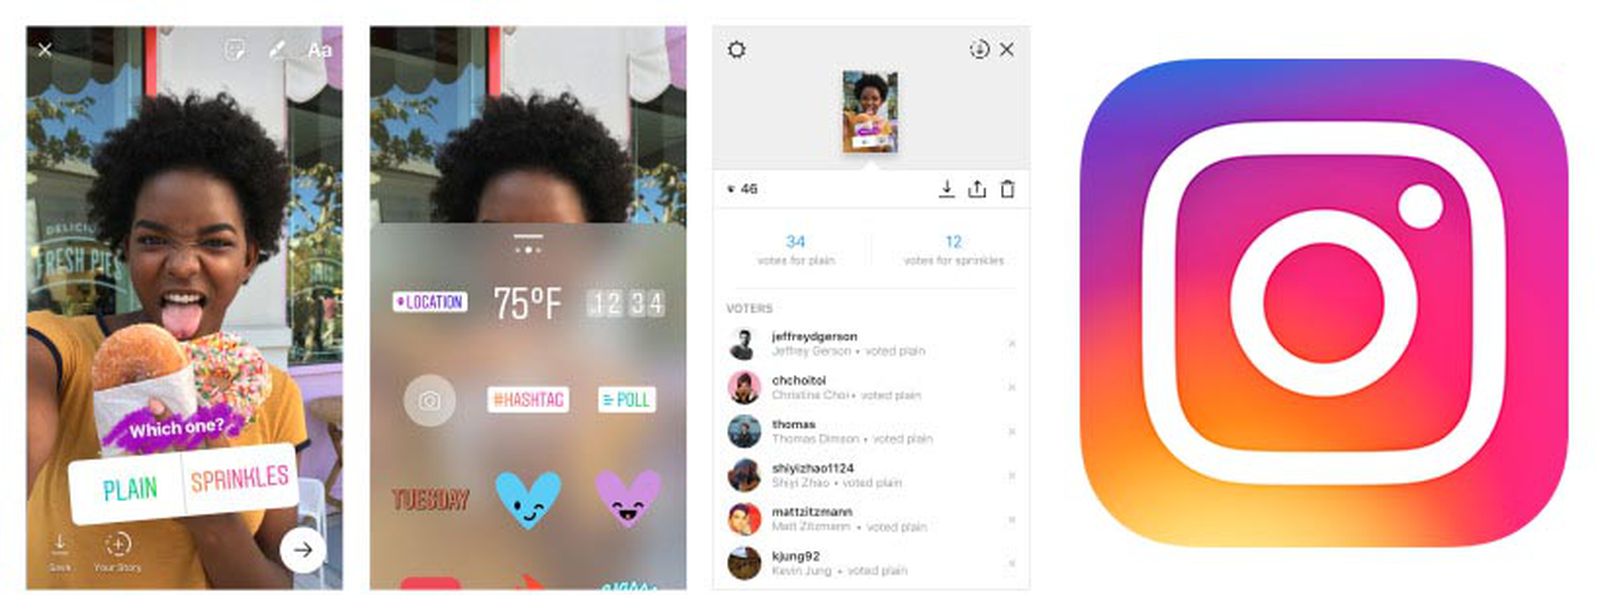 Download You Can Now Poll Your Followers In Instagram Stories Macrumors